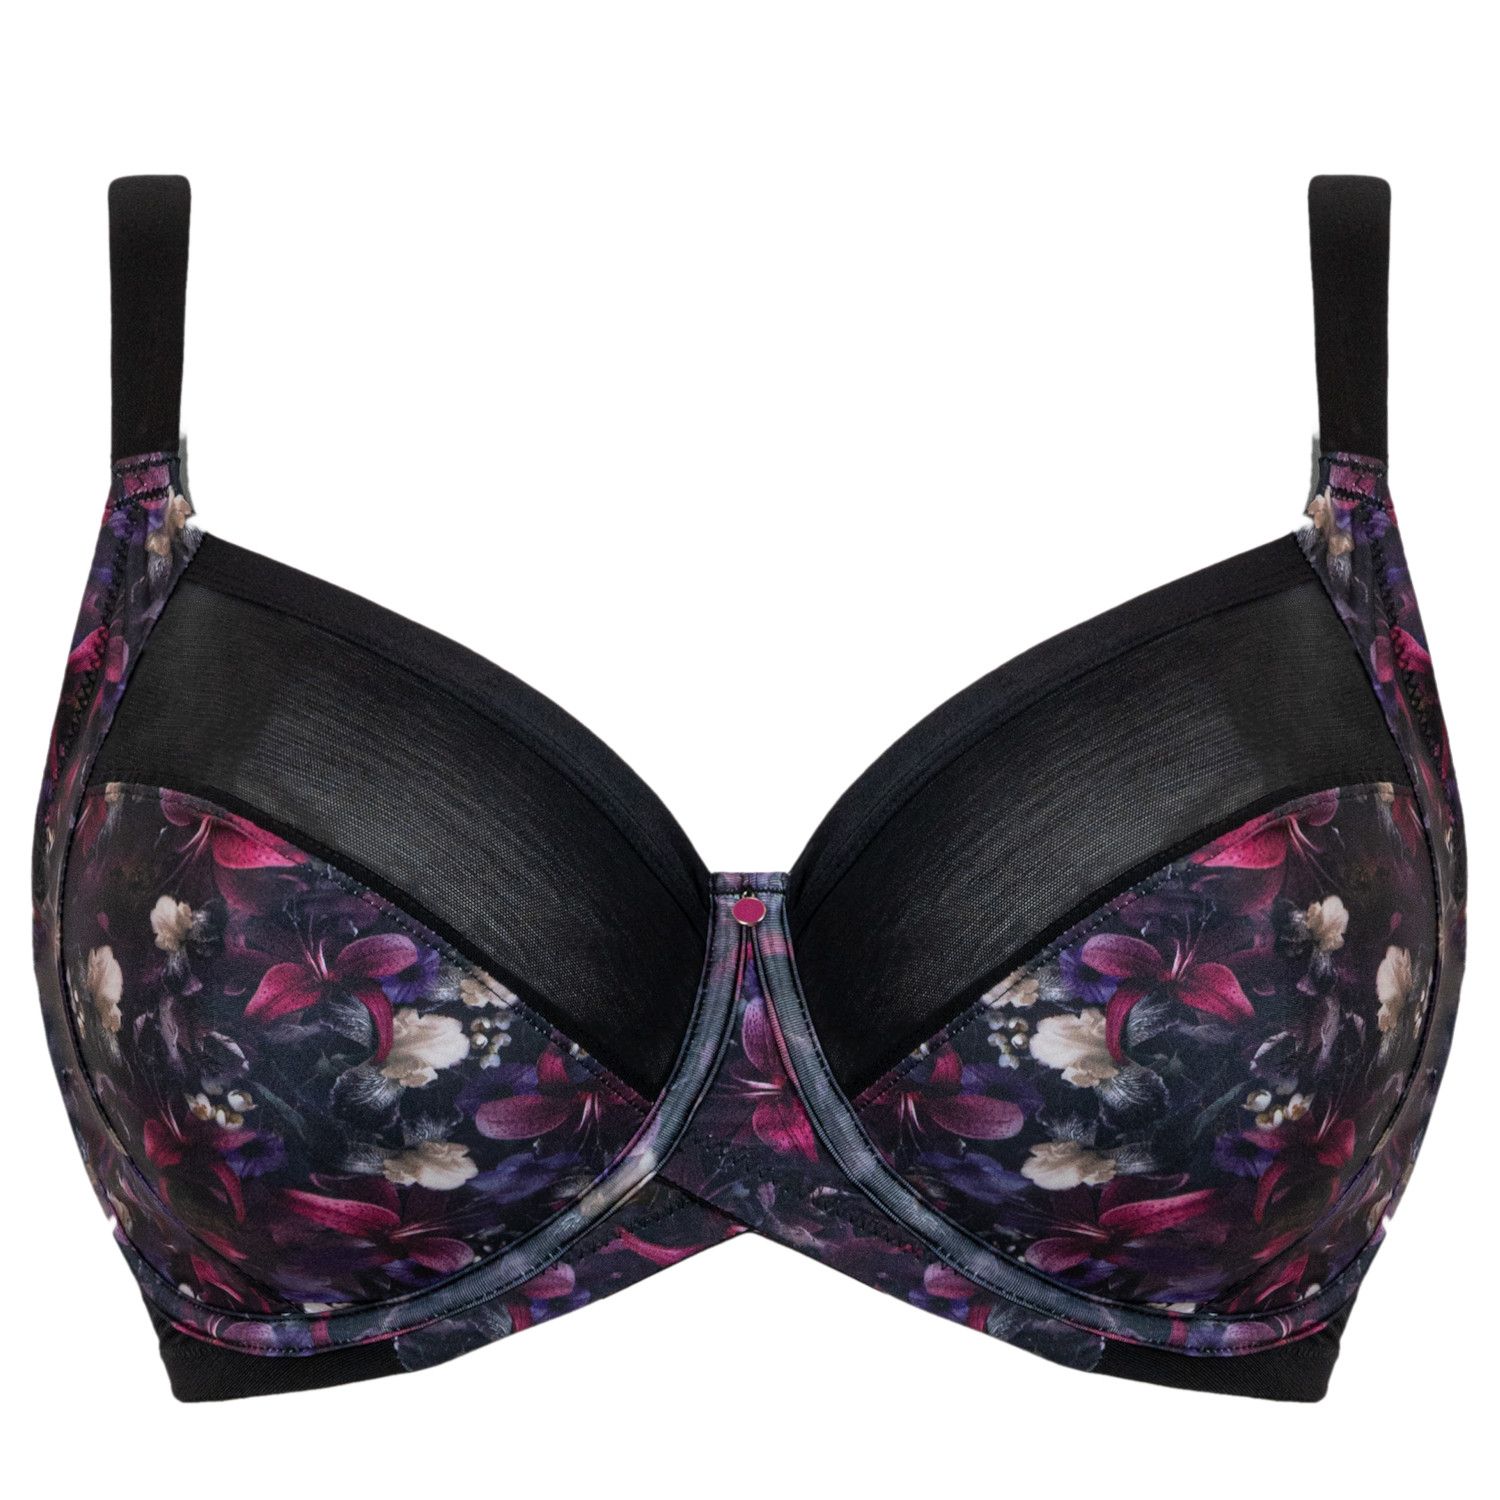 Full cup bra in mink with removable underwires 24h Absolute Soft